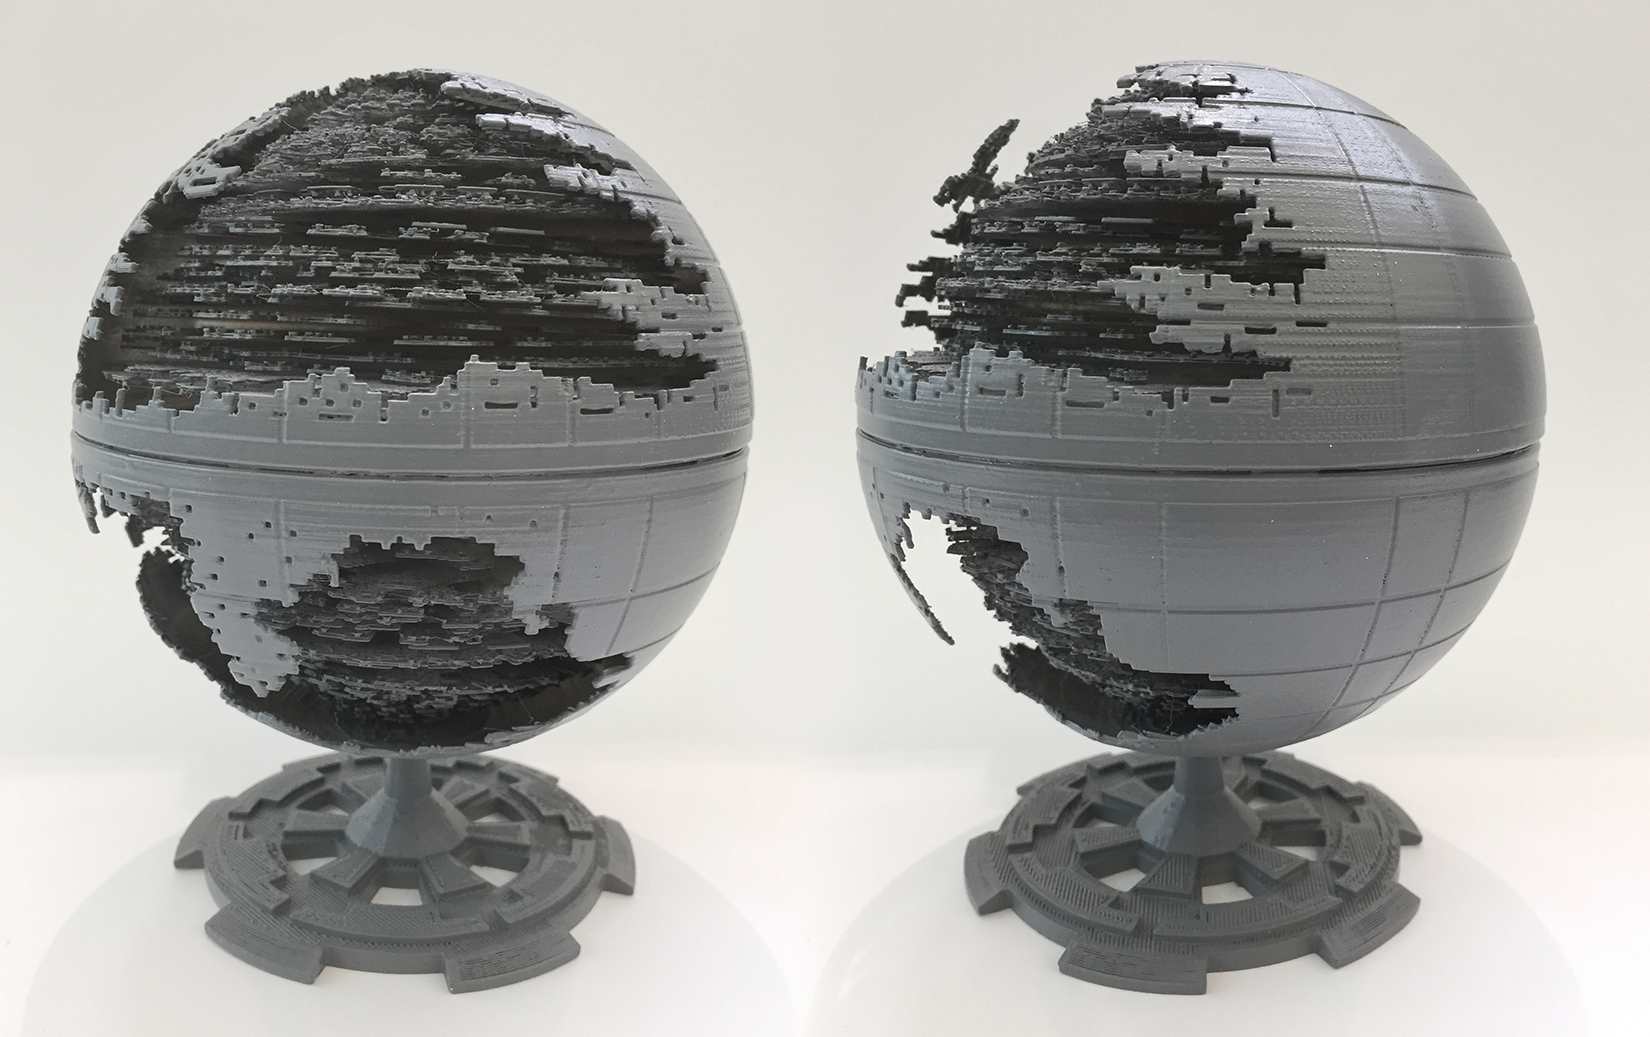 3D Printed Star Wars Death Star by Doodle_Monkey